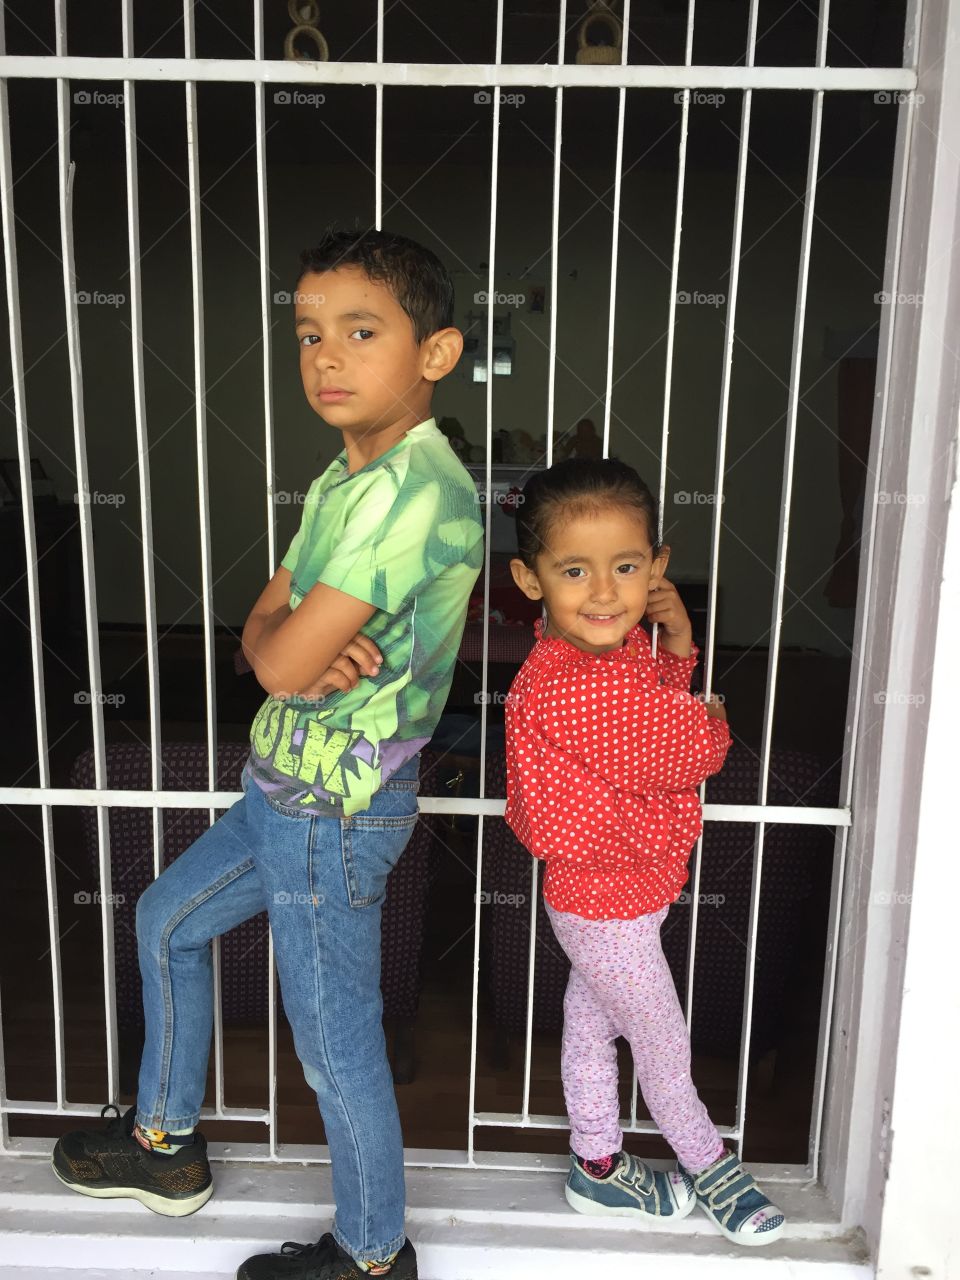 Brother and sister standing near window